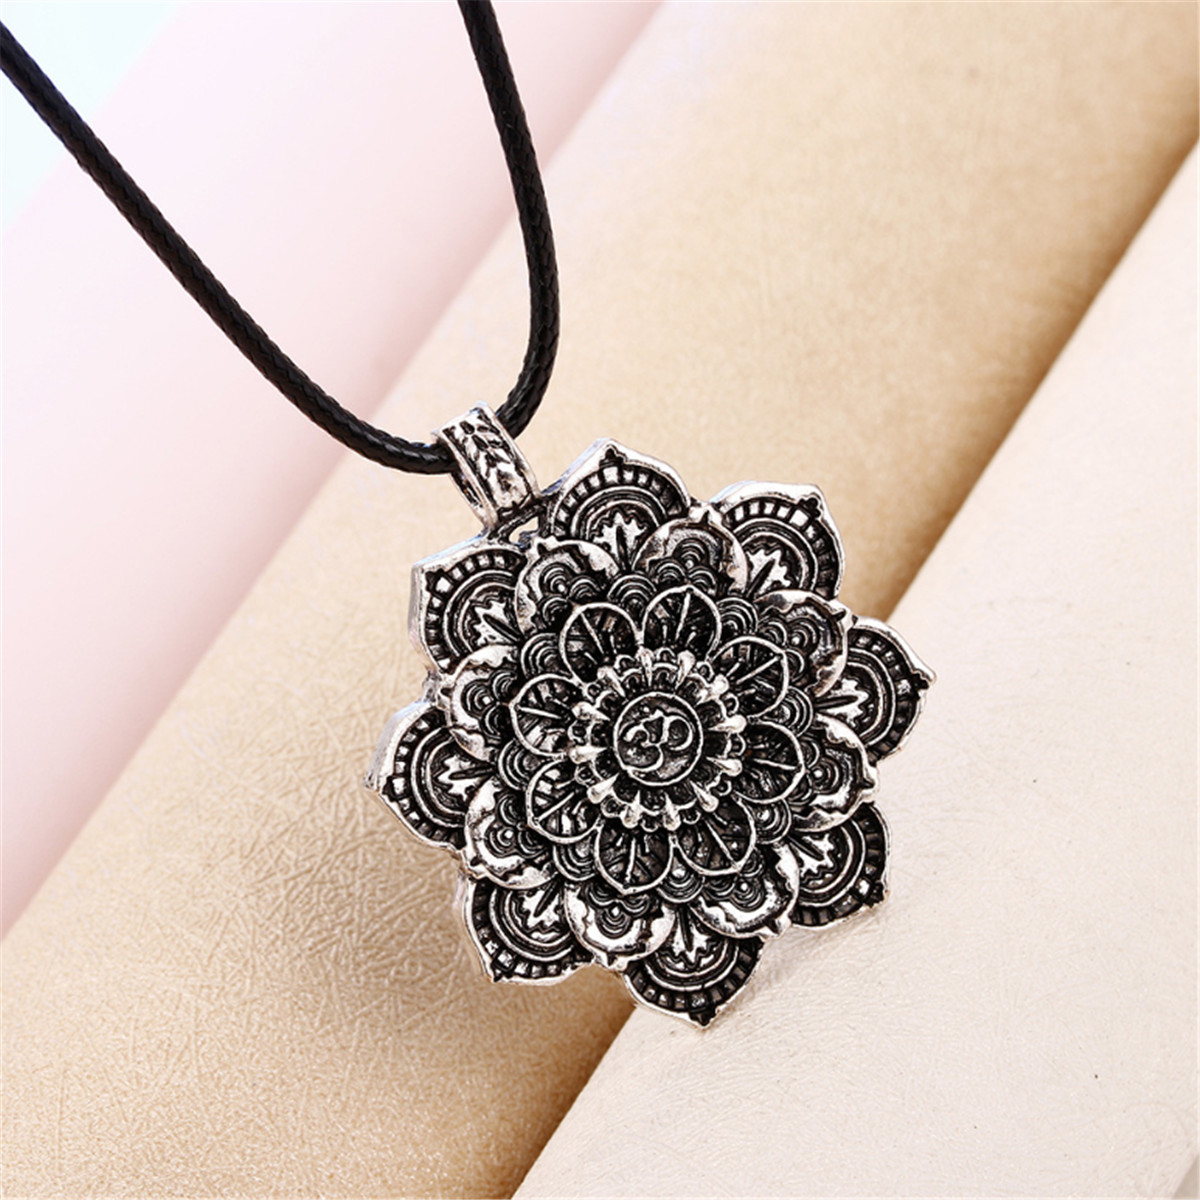 Cut out lotus Buddhist gift Yoga jewelry necklace Big Sterling Silver lotus flower pendant